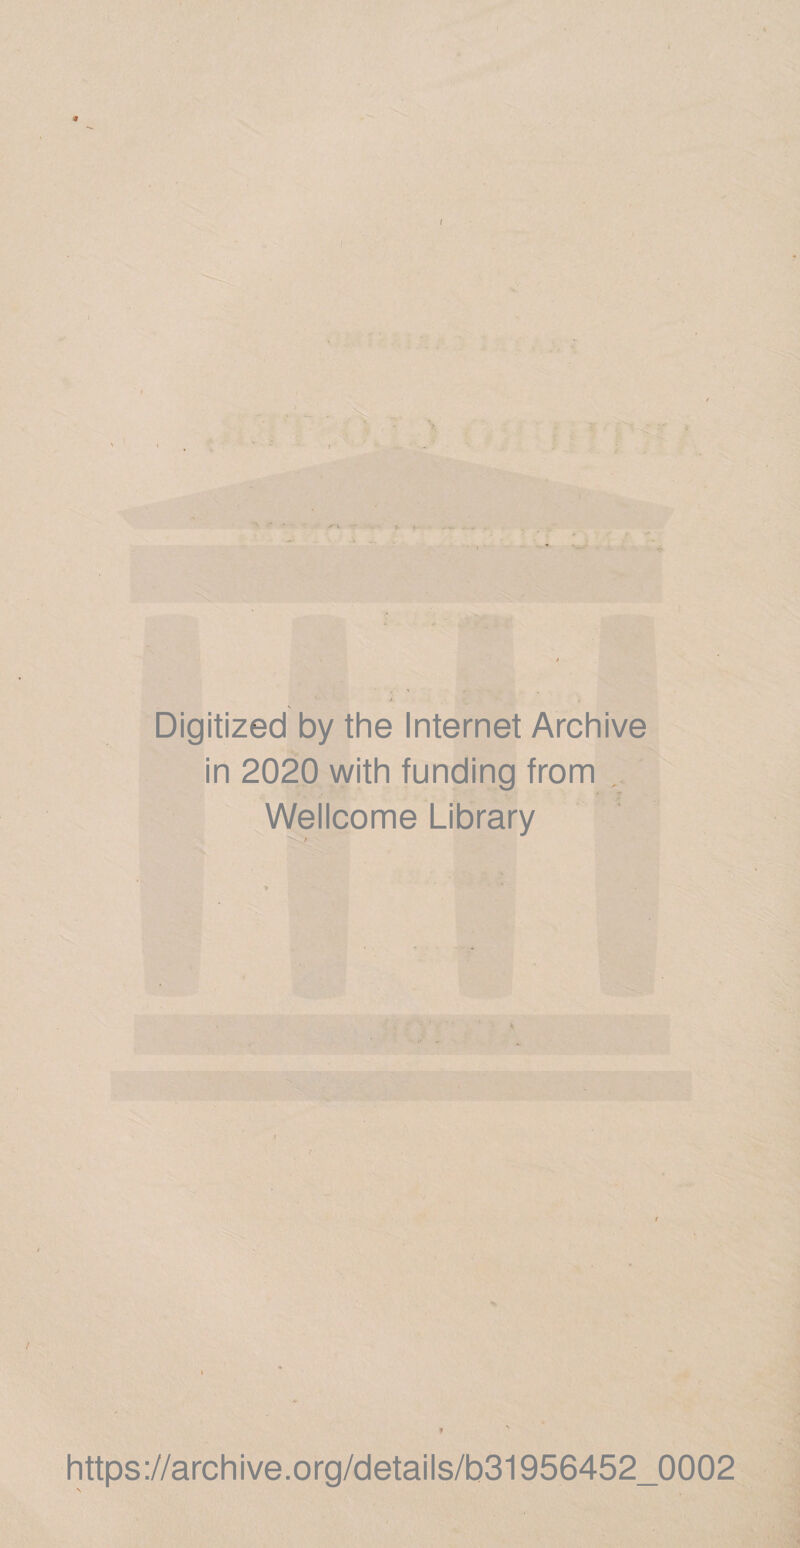 ^ * T t Digitized by the Internet Archive in 2020 with funding from • -r Wellcome Library https://archive.org/details/b31956452_0002